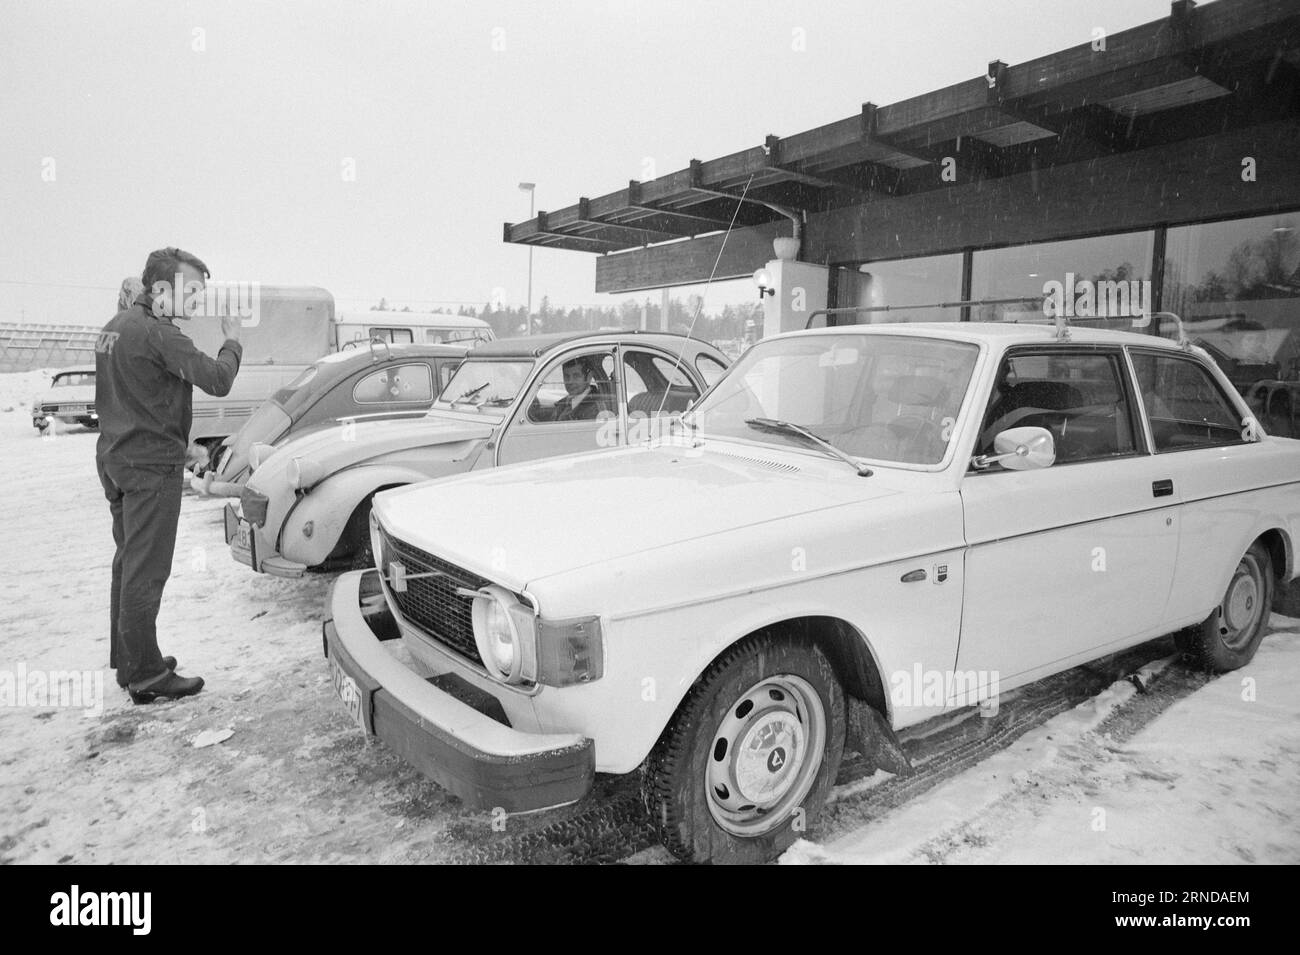 Actual 03 - 6 - 1974: The smallest came FarthestThis is how we delay the petrol card. In these petrol-poor times, it is definitely an advantage to have a small car, confirmed this test which Aktuell carried out together with professionals.  Dag Edvardsen from the Norwegian Automobile Association arranged the technical arrangements for a reasonable comparison between large and small cars. He asks the drivers to keep the same speed.  Photo: Sverre A. Børretzen / Aktuell / NTB ***PHOTO NOT IMAGE PROCESSED*** This text has been automatically translated! Stock Photo